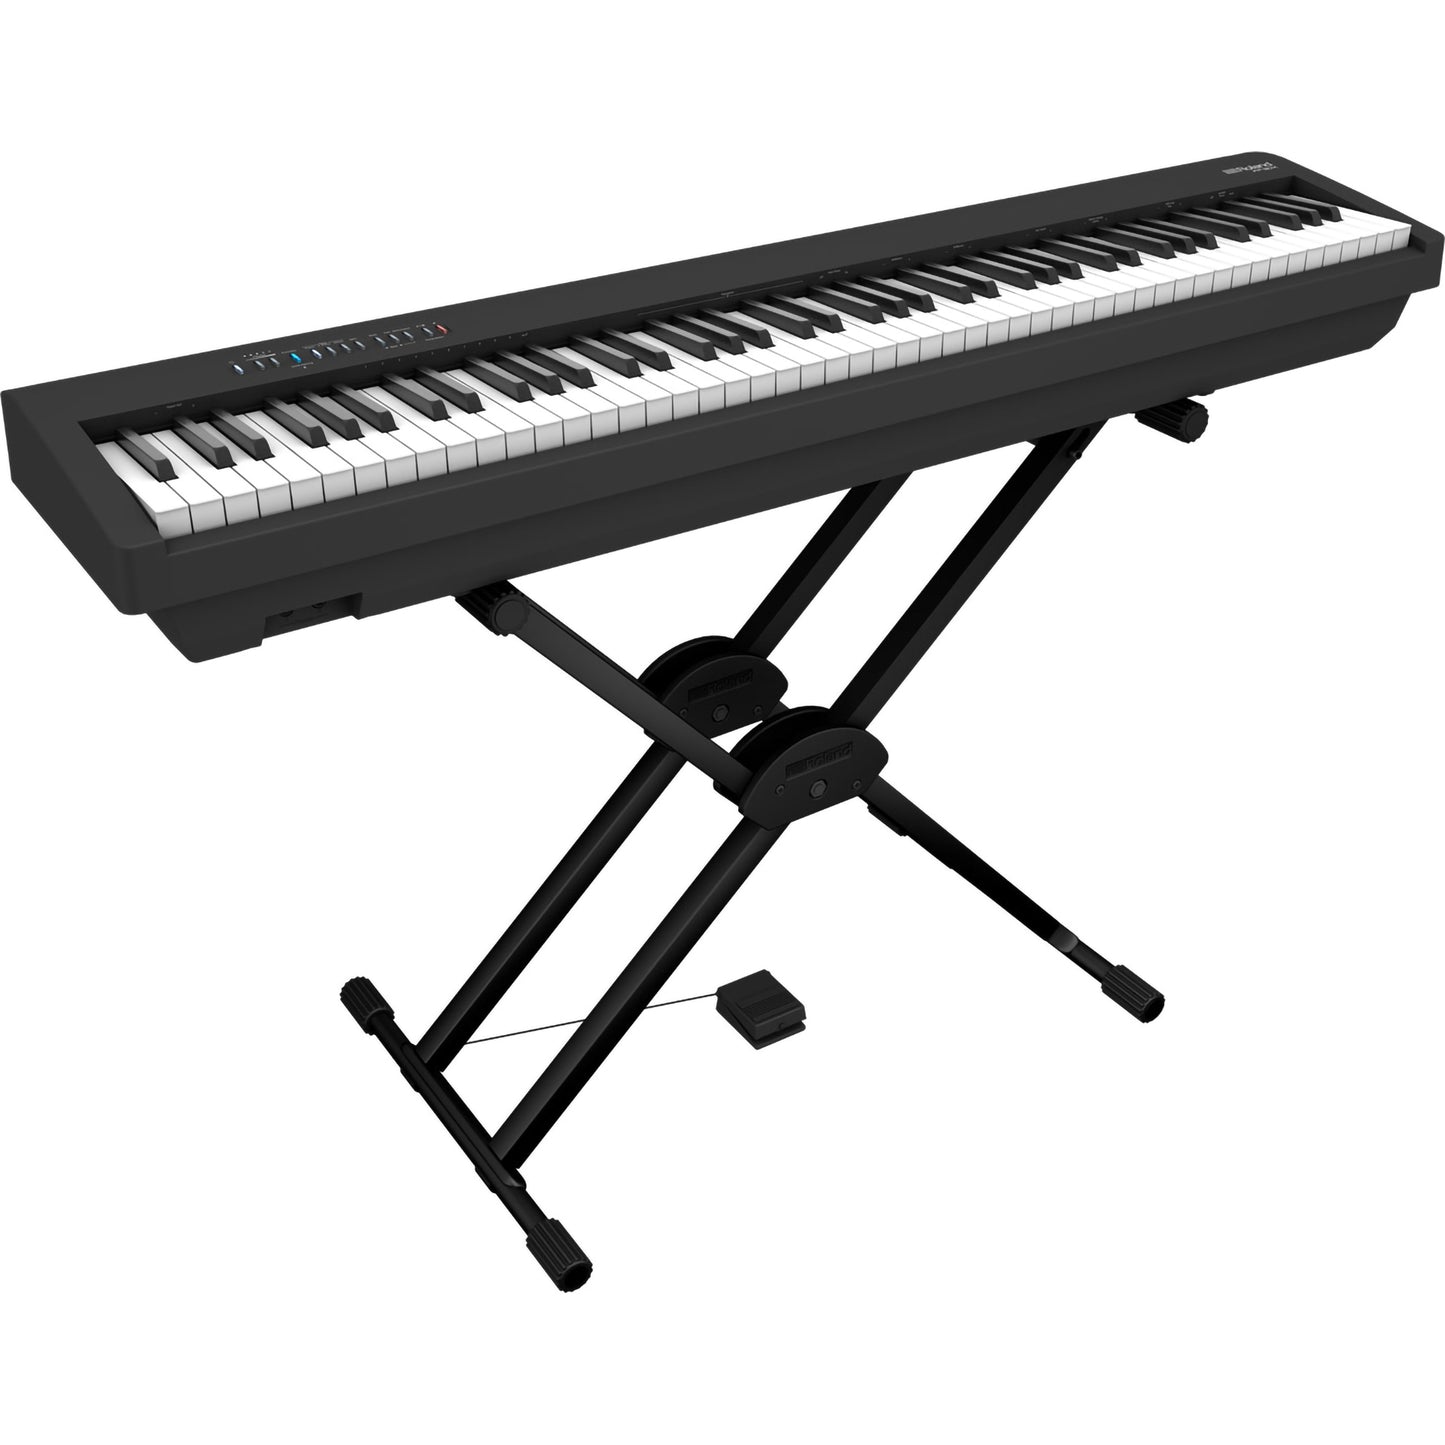 Roland FP-30X-BK Portable Piano w/ Built in Speakers, Bluetooth - Black